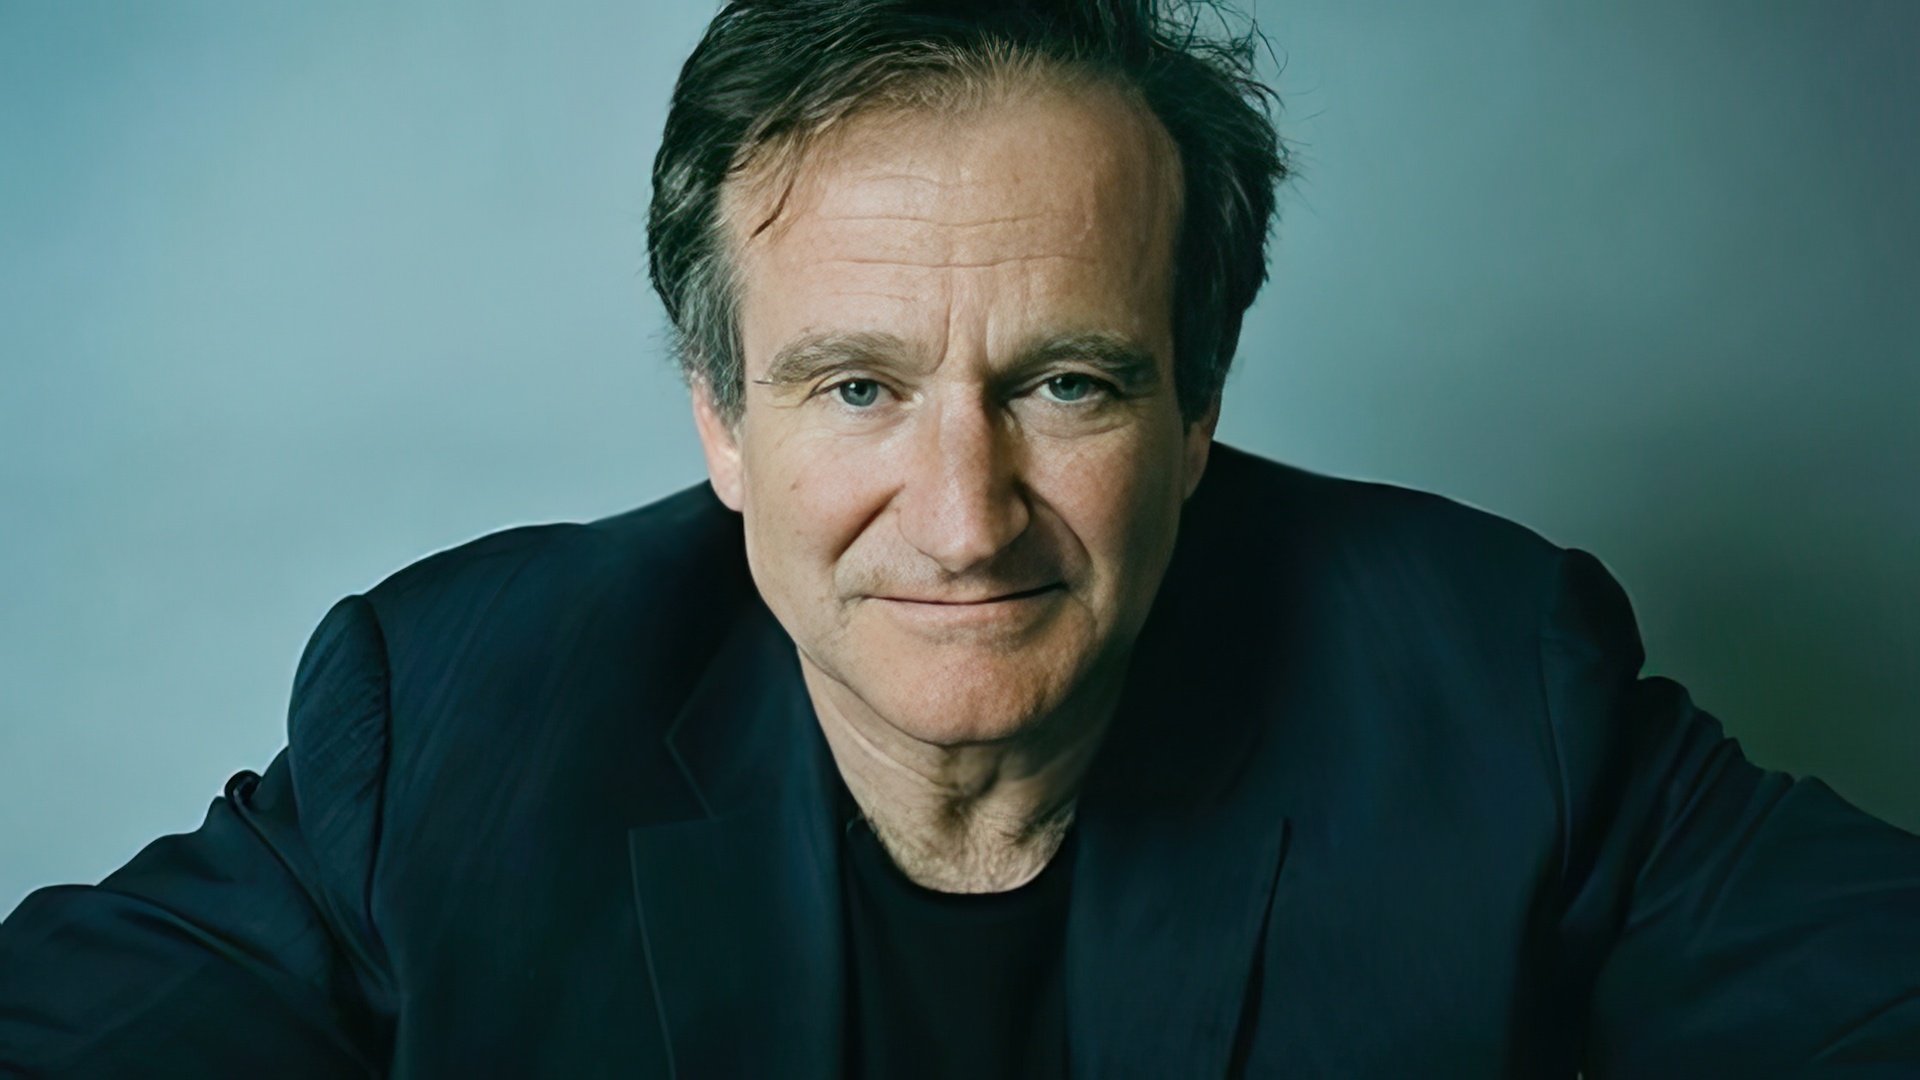 In 2014, Robin Williams passed away